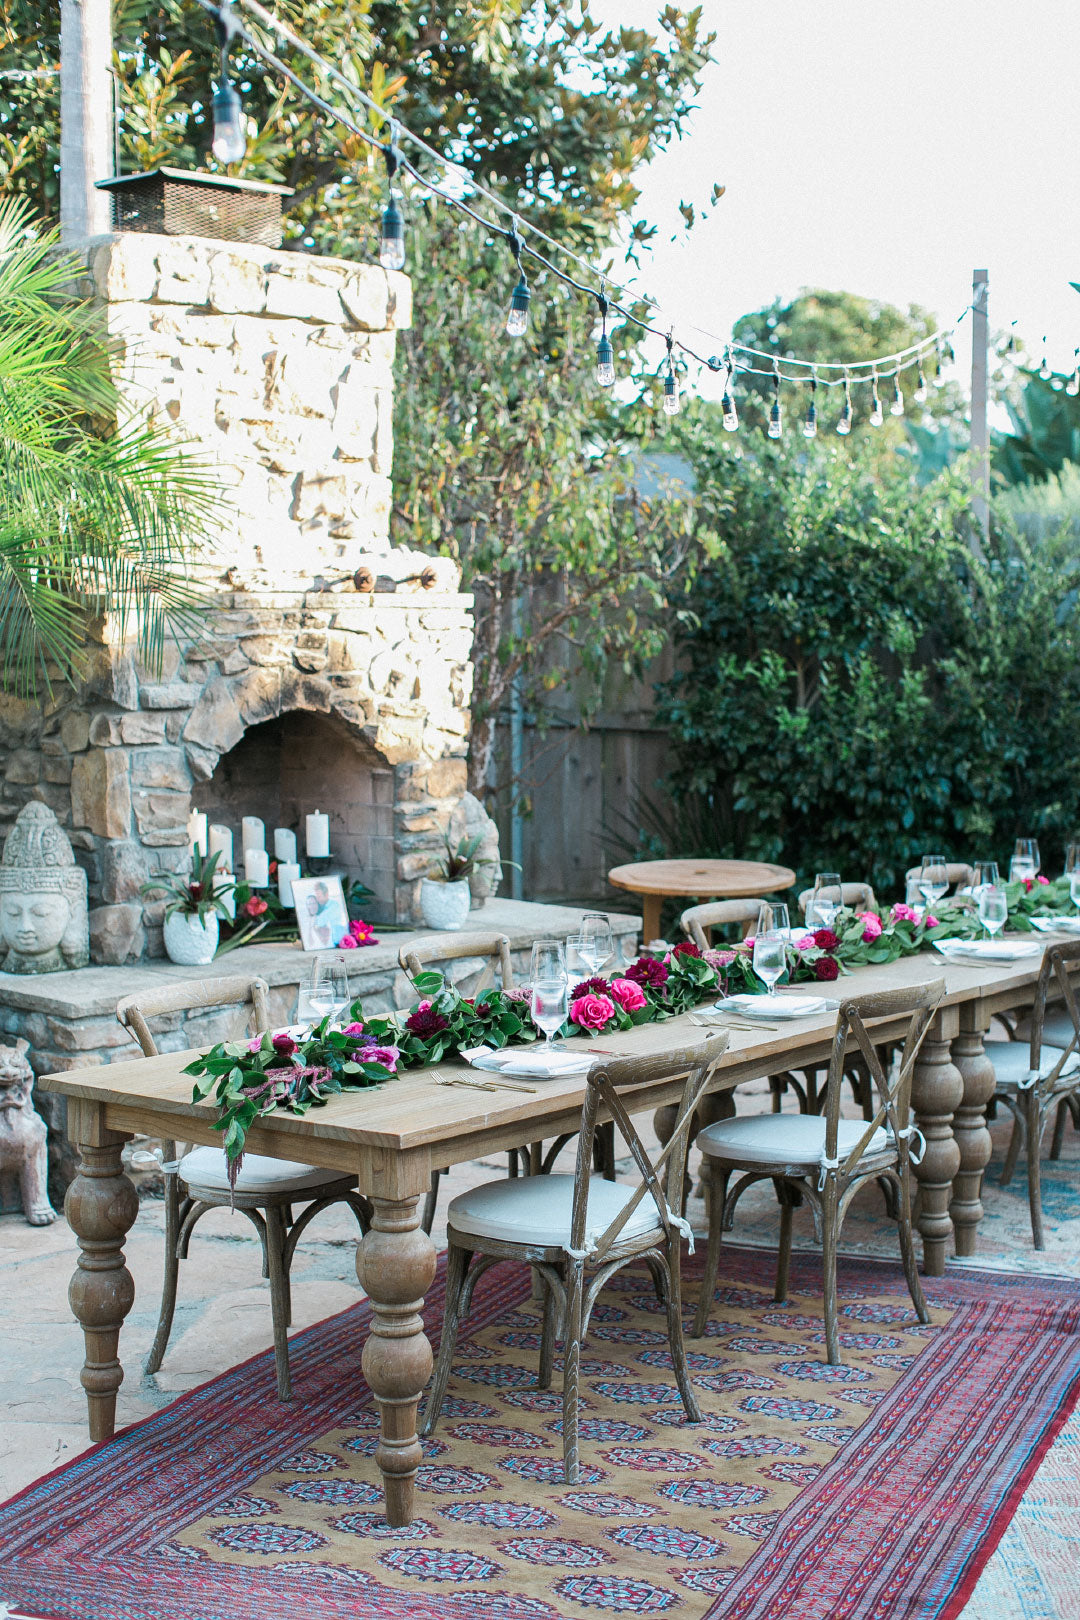 Wedding table by outdoor fireplace